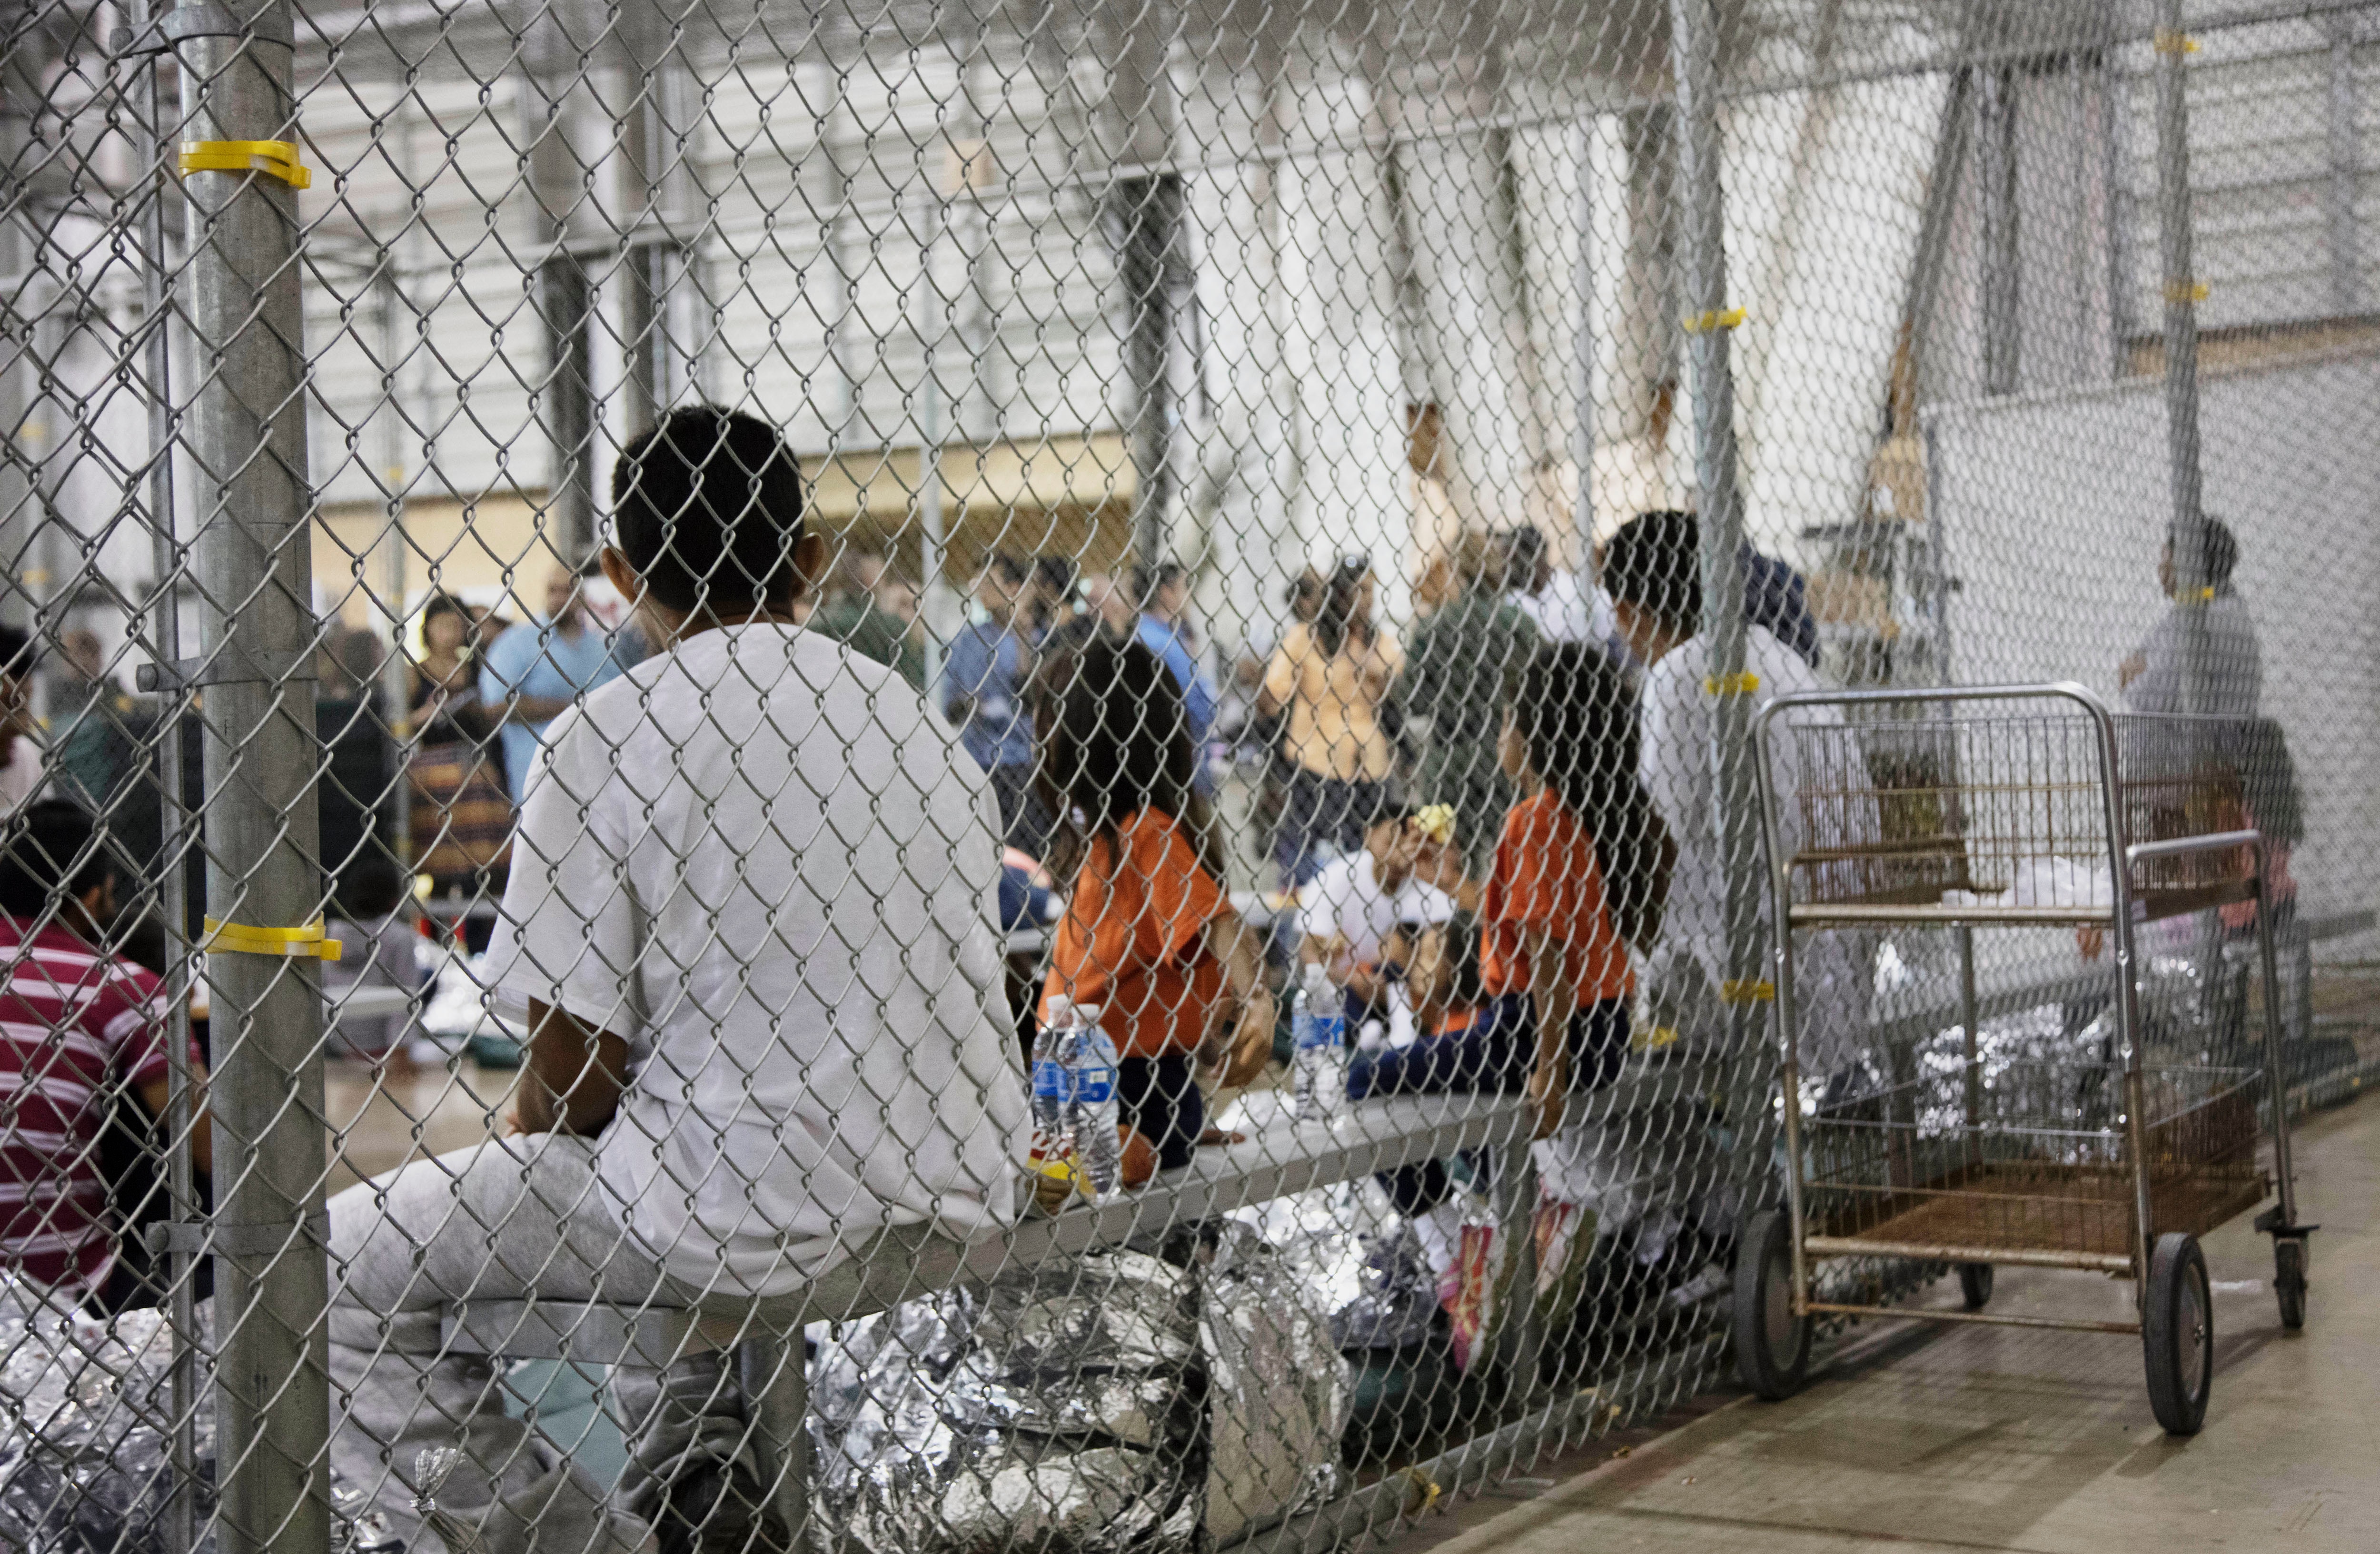 People taken into custody related to cases of illegal entry into the United States sit in cages.